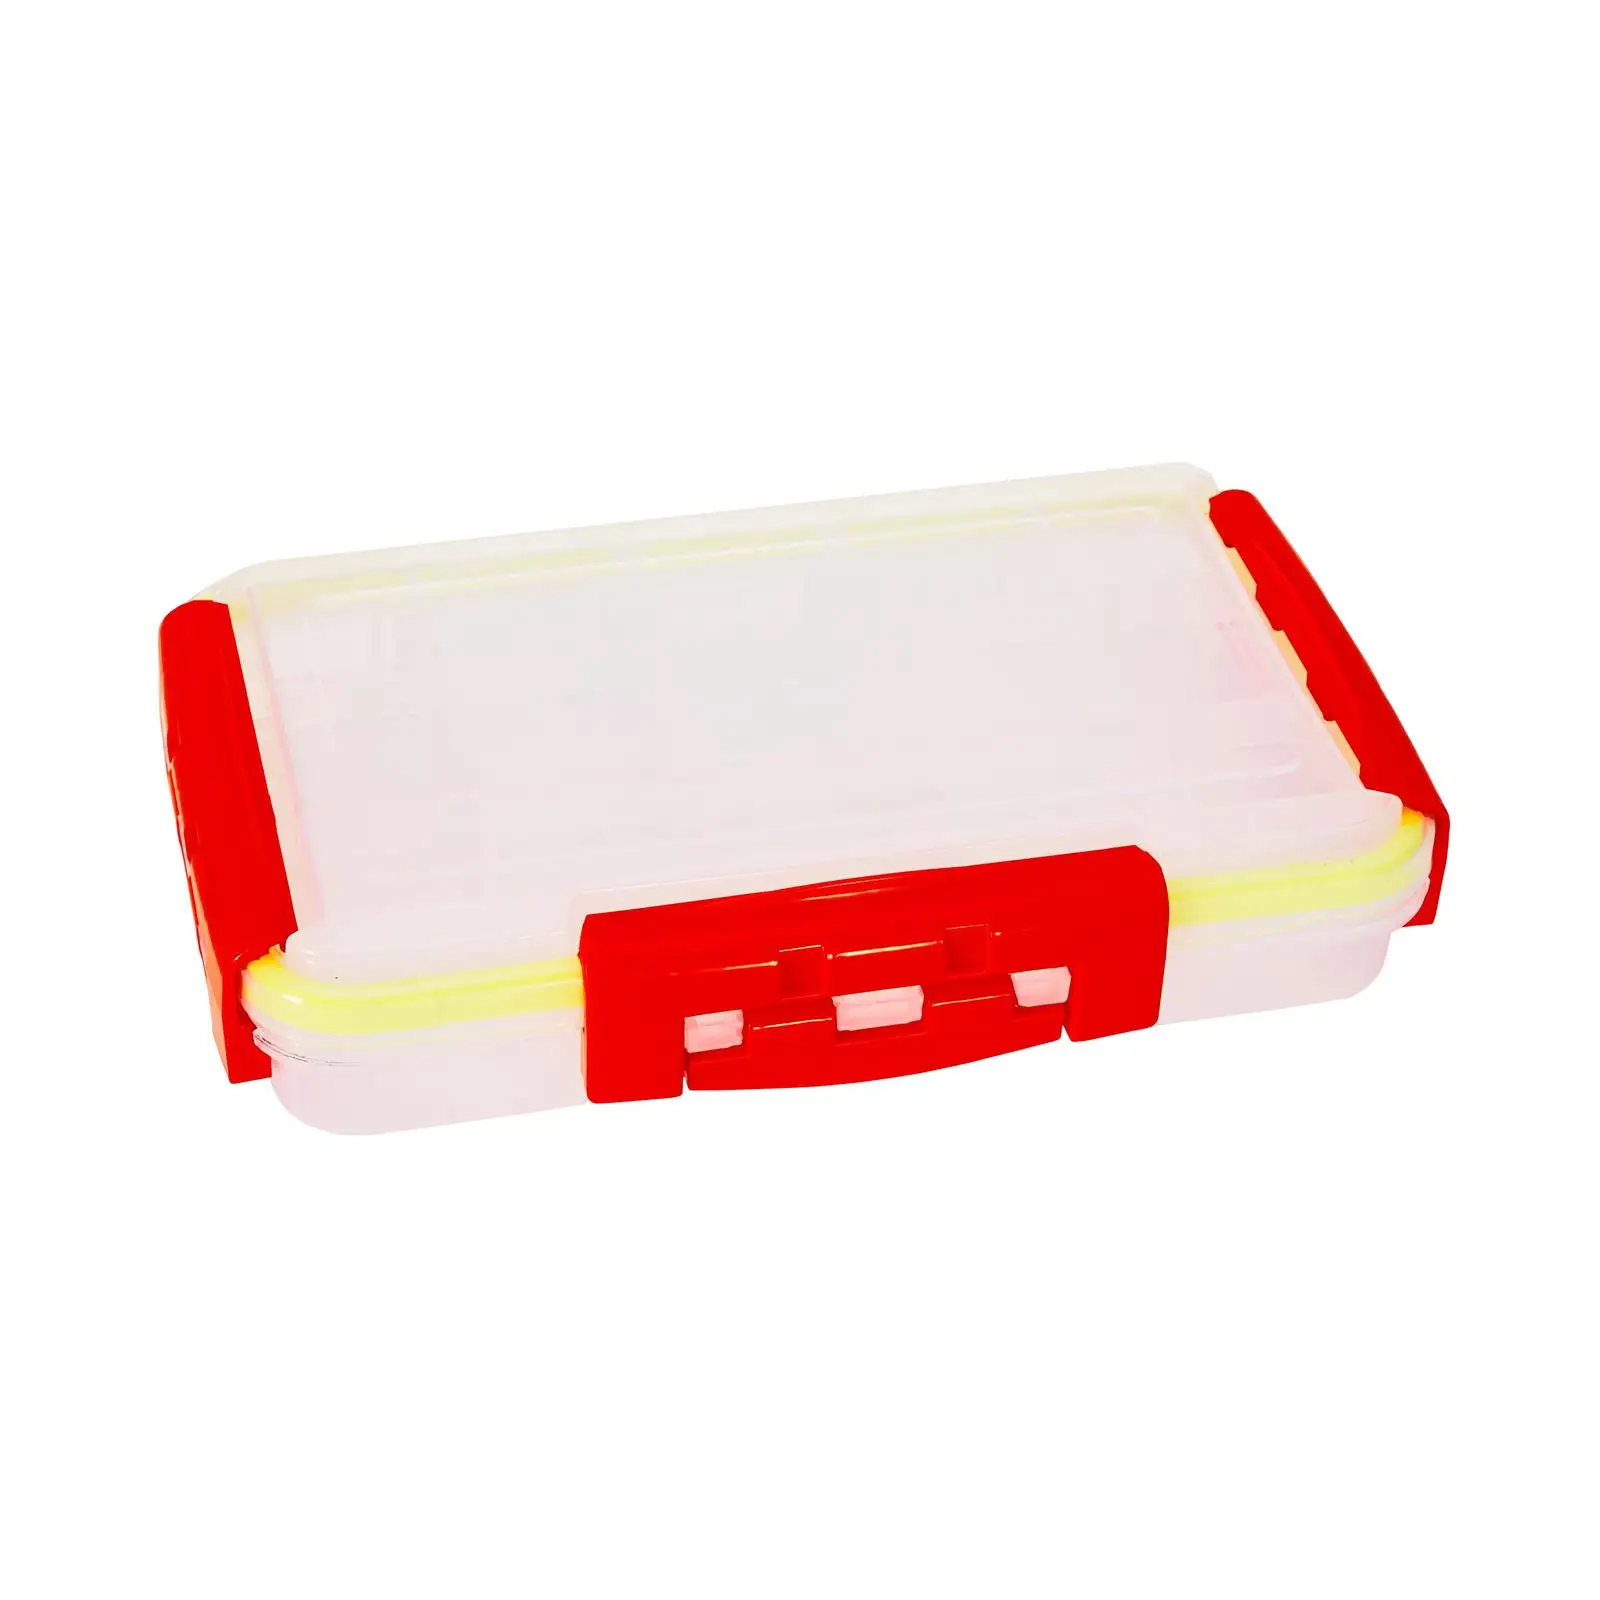 Fishing Lure Box Storage Containers Tray, Fishing Tackle Box, Fishing Tackleboxes, Fishing Equipment Box, Clear Lid